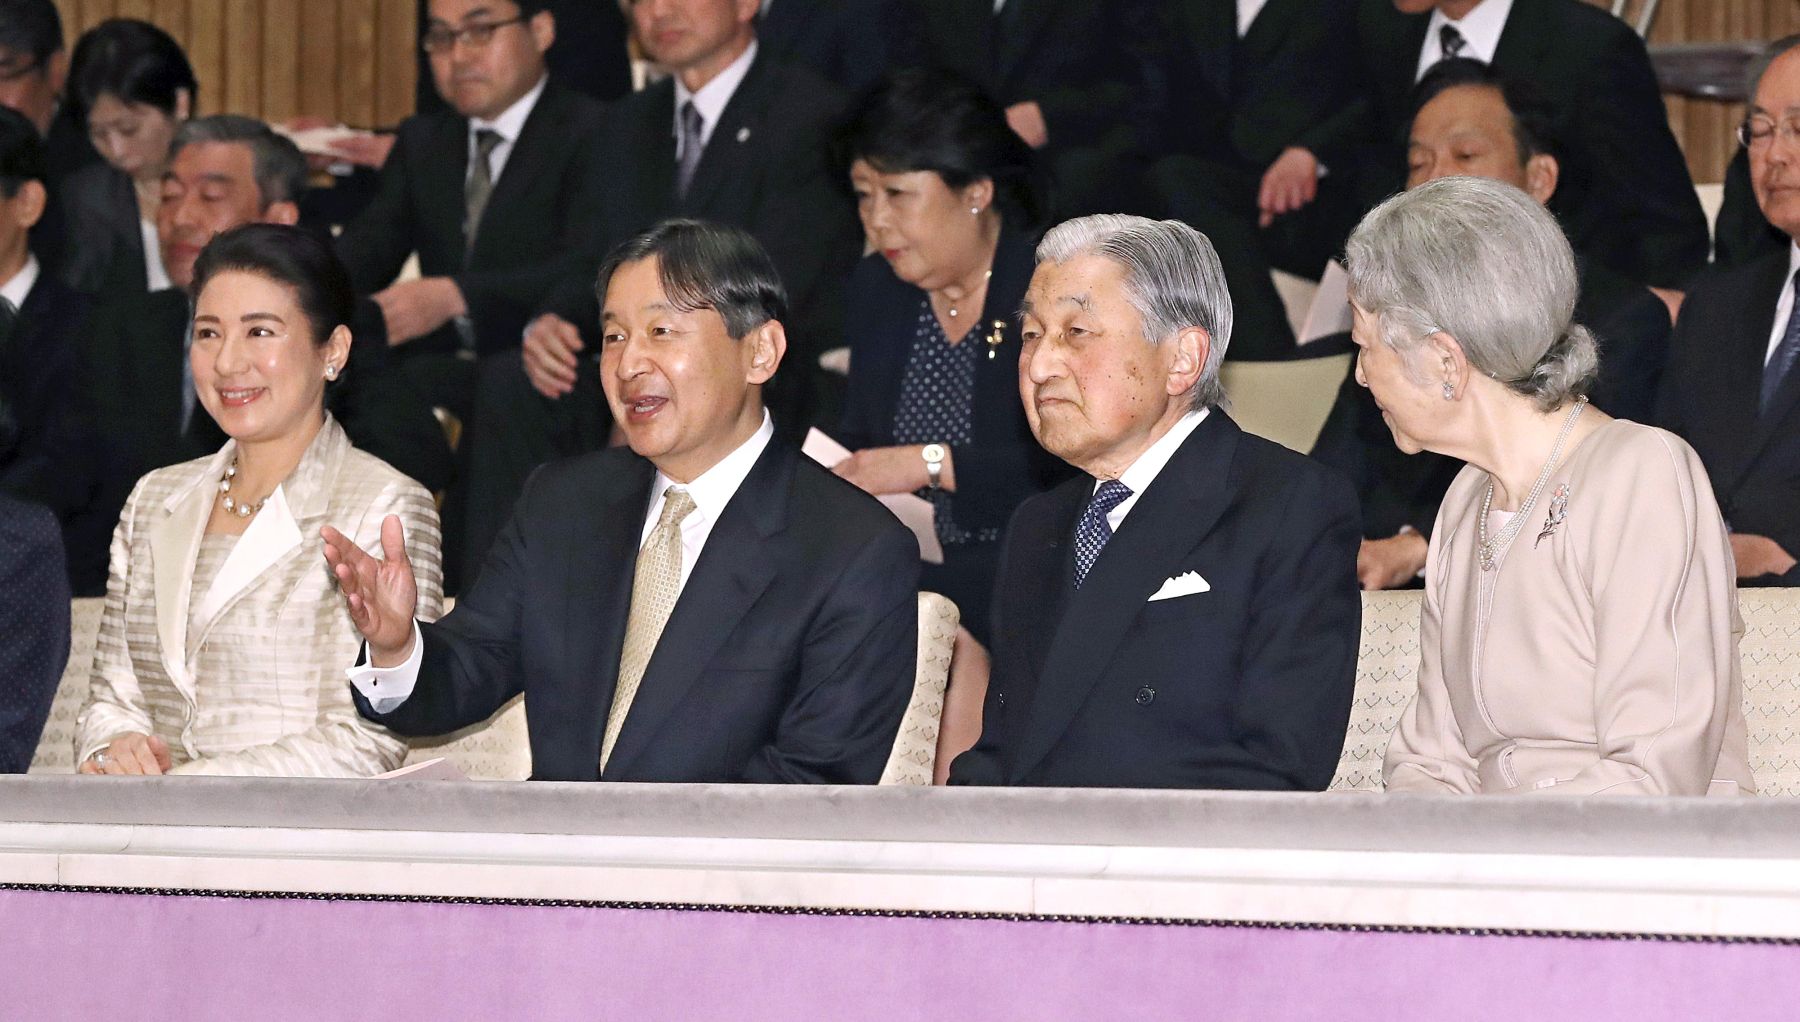 The Japanese Emperors Role in the 21st Century